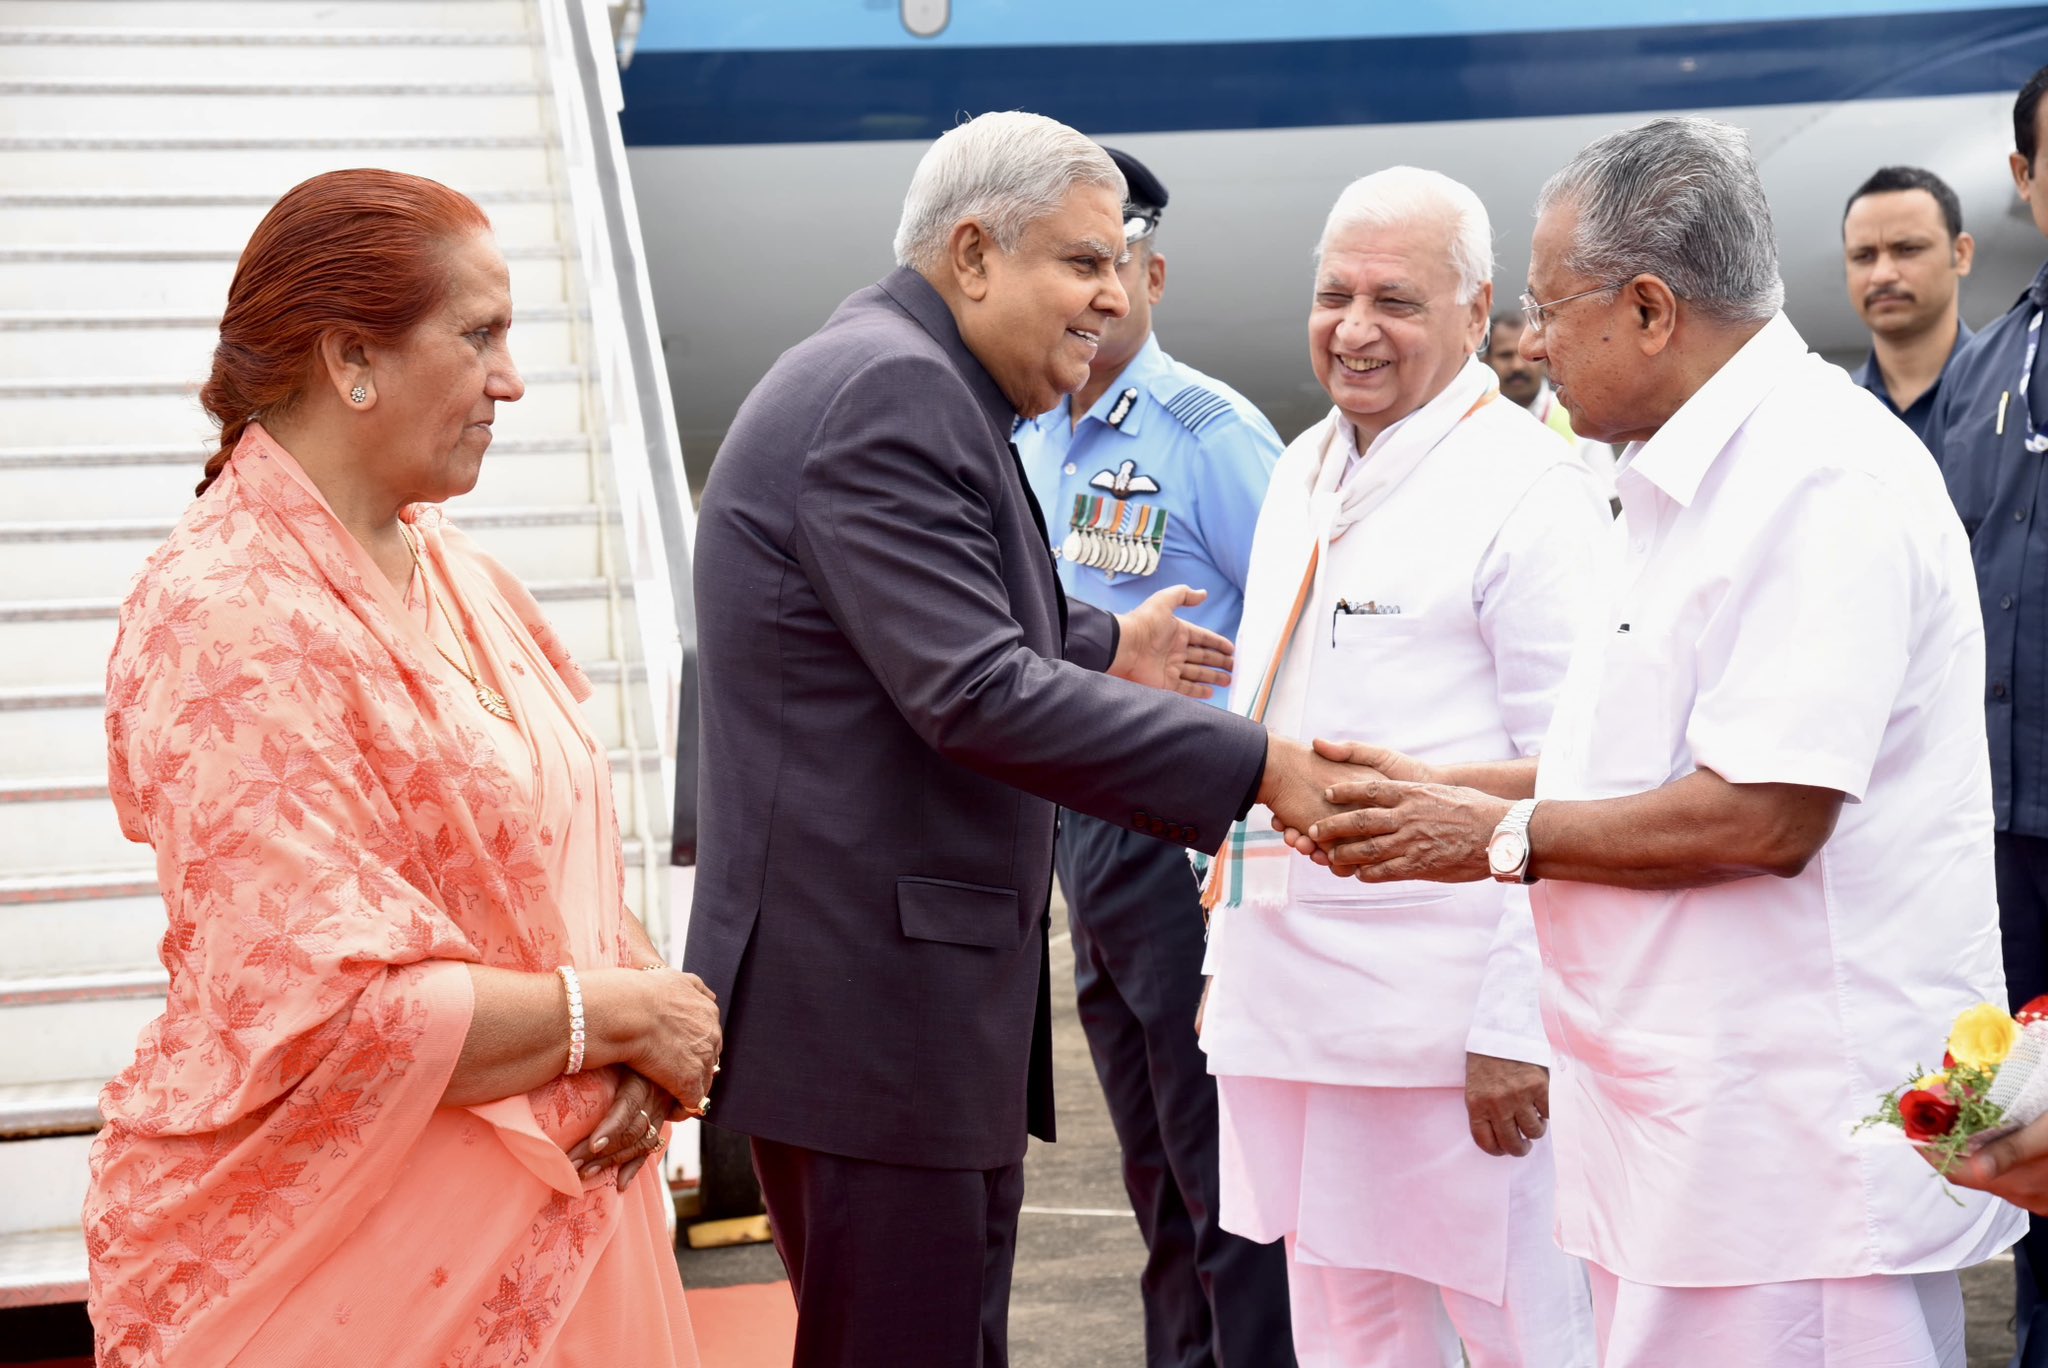 The Vice-President, Shri Jagdeep Dhankhar & Dr. Sudesh Dhankhar being welcomed by the Governor of Kerala, Shri Arif Mohammed Khan, Chief Minister of Kerala, Shri Pinarayi VIjayan, and other dignitaries on their arrival in Thiruvananthapuram, Kerala on July 6, 2024.